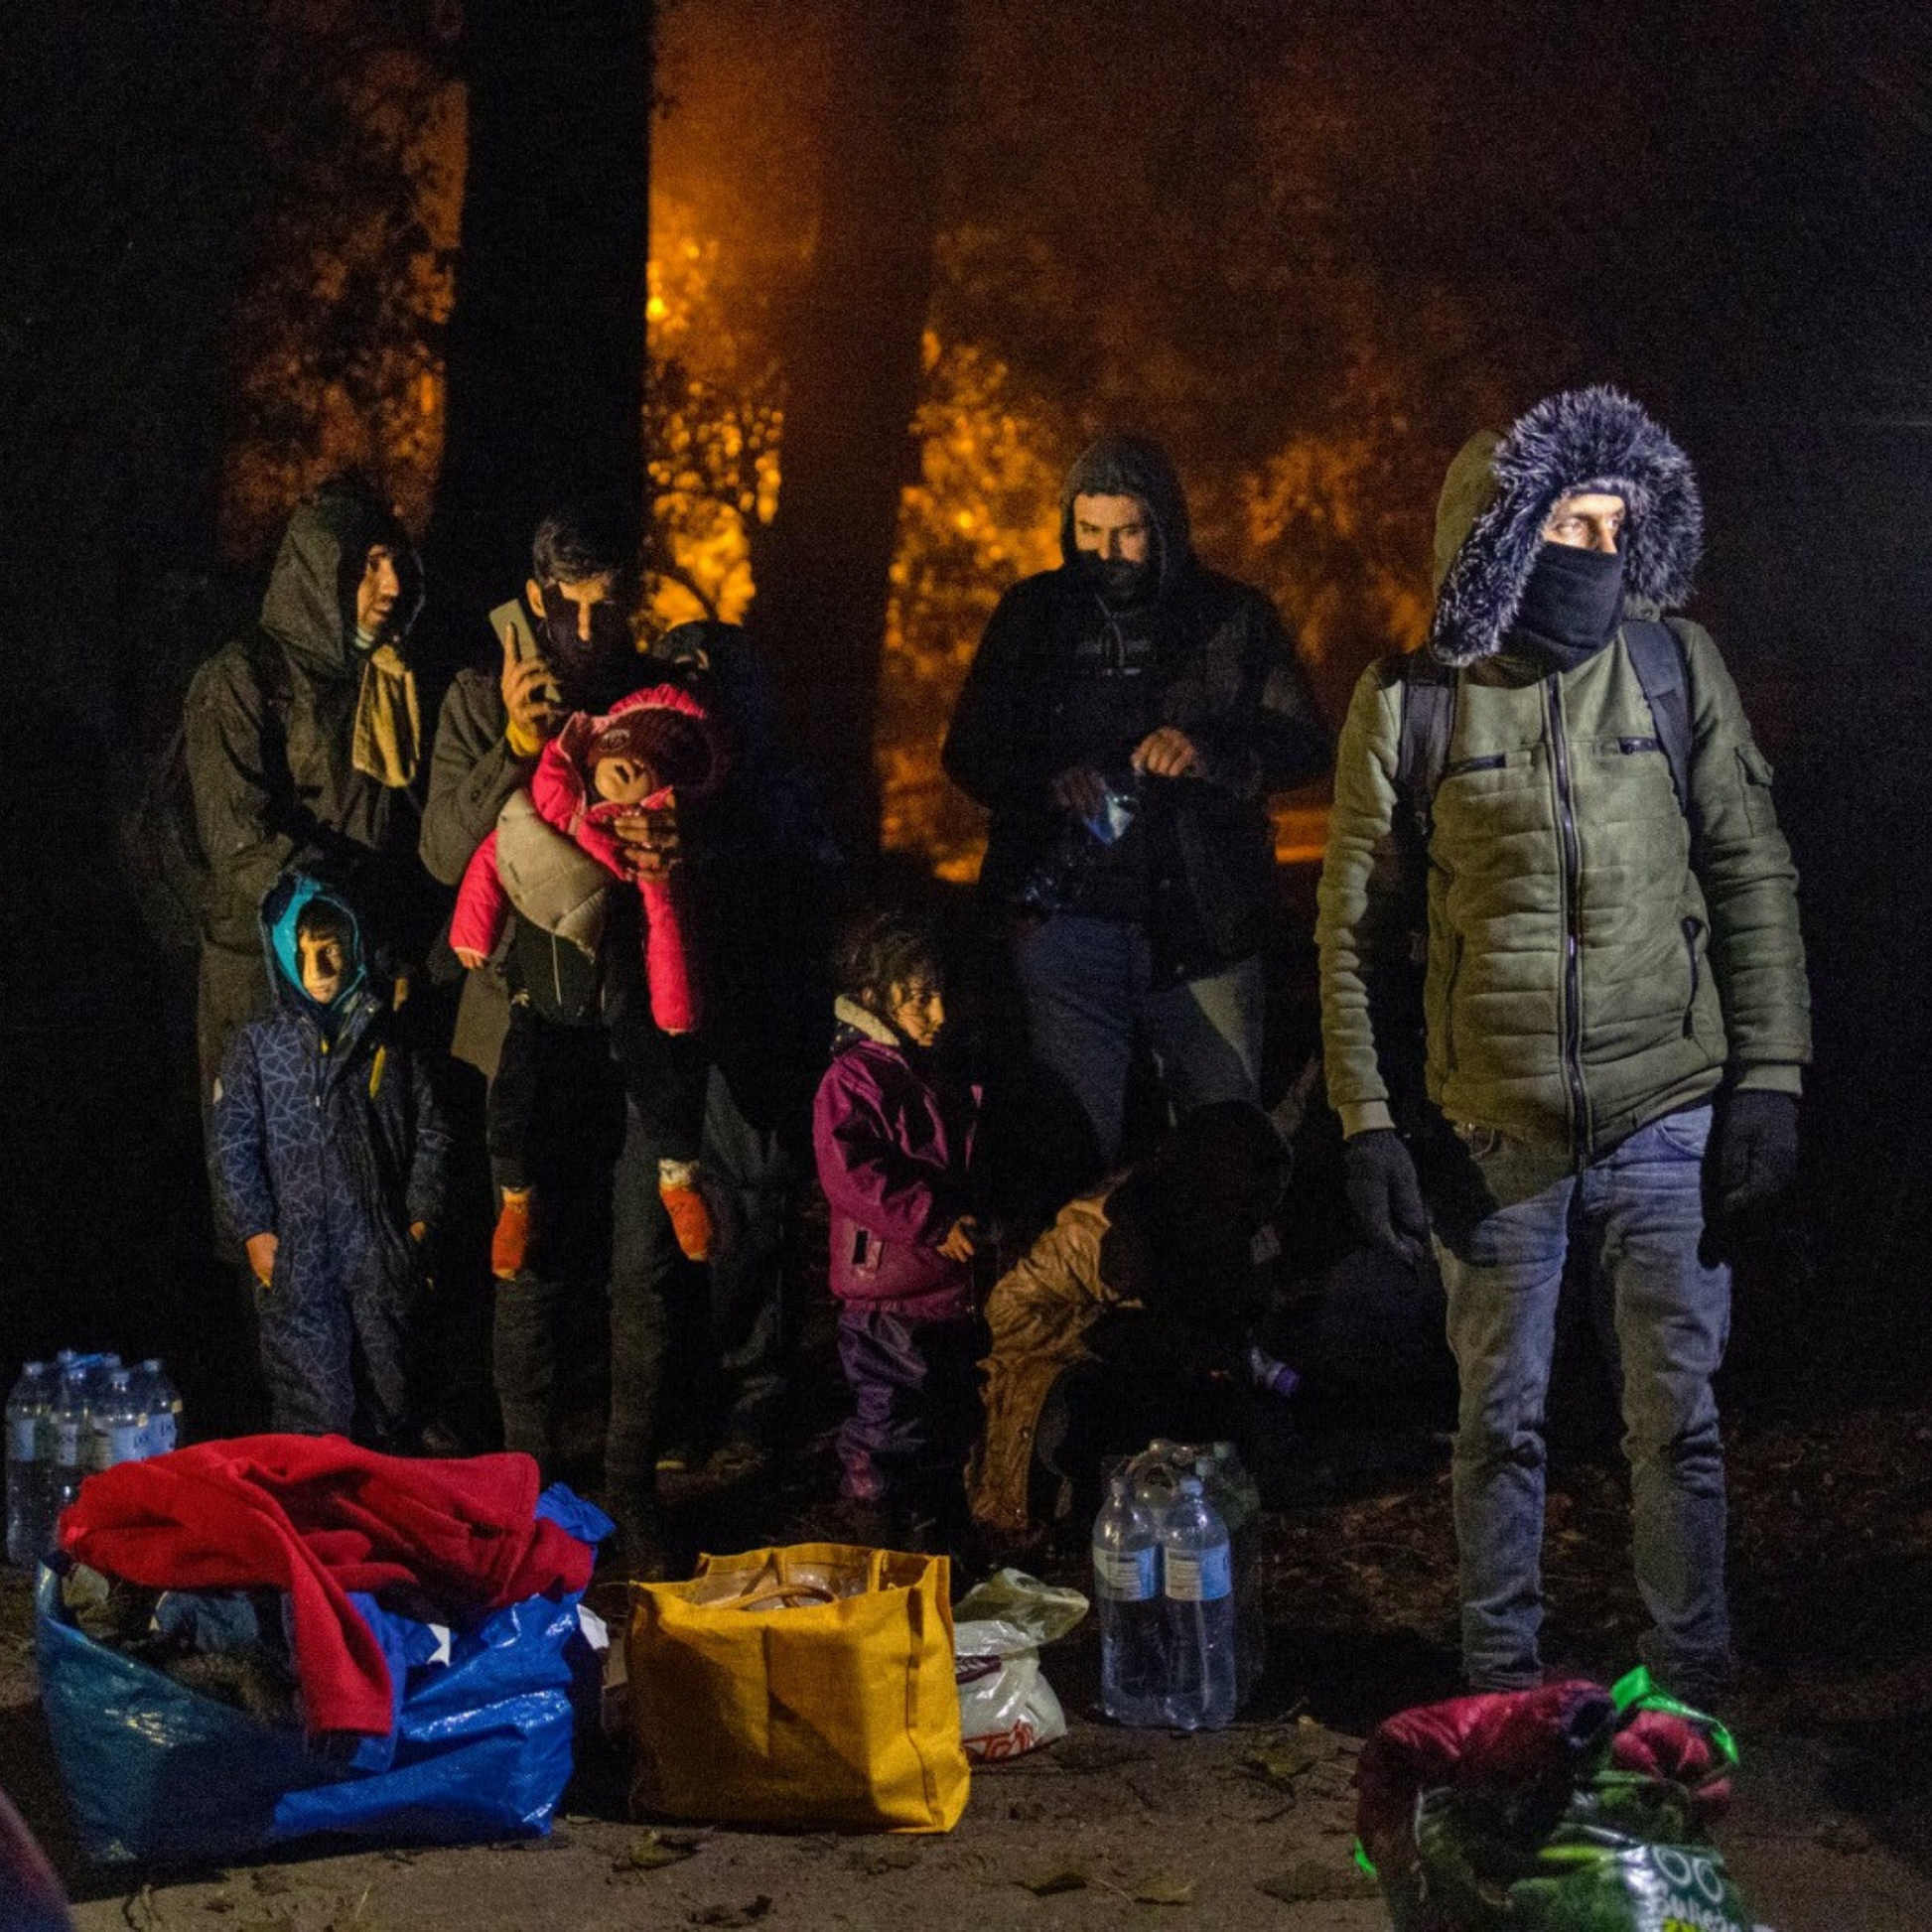 Refugees queueing up at night with lugagge on the floor.